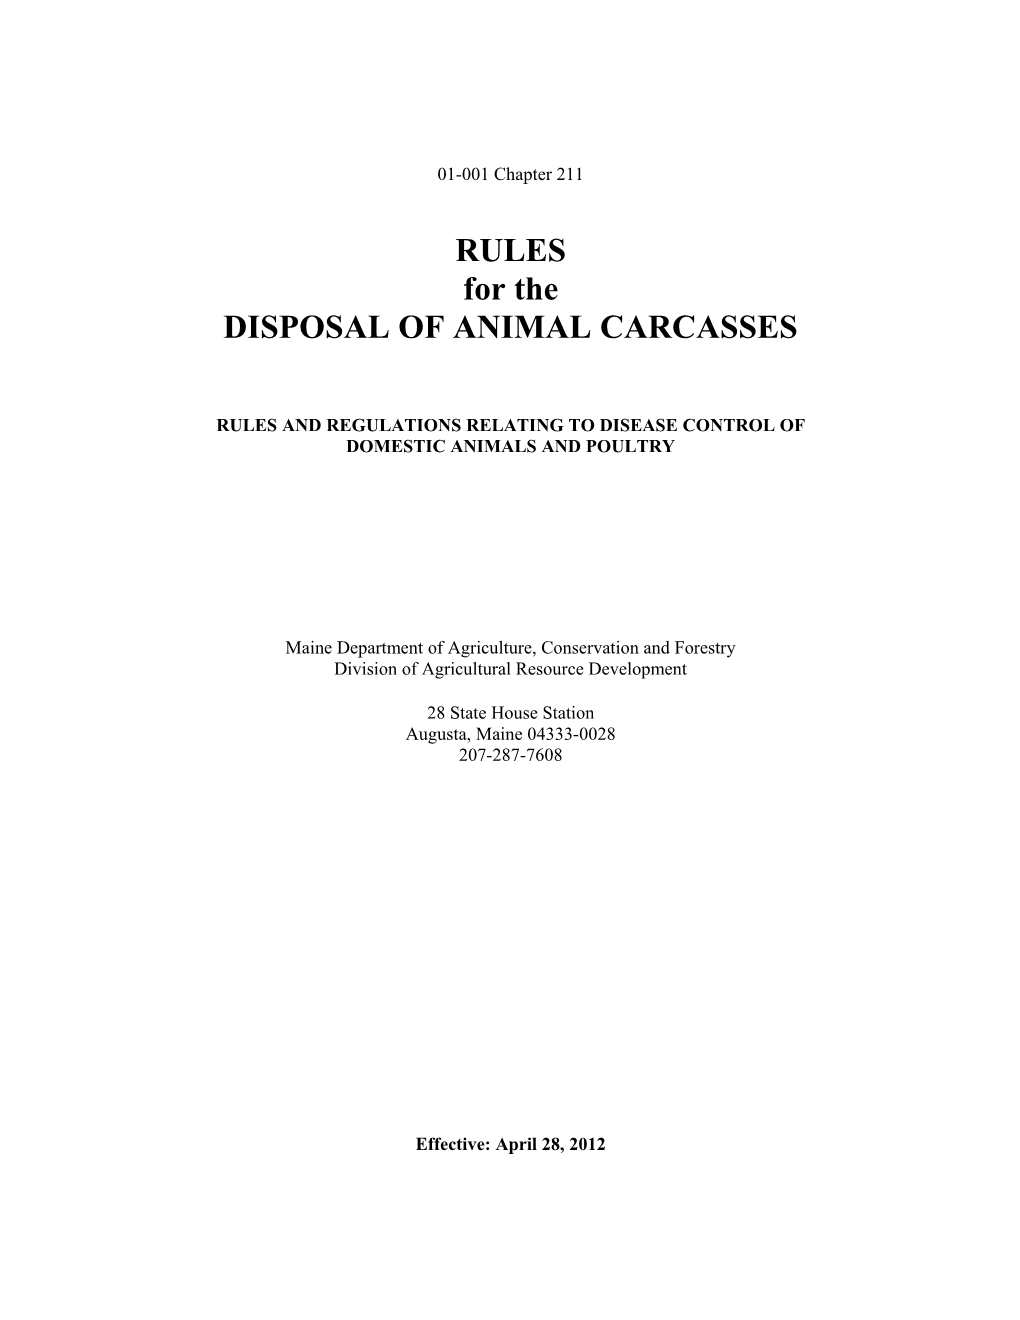 Rules and Regulations Relating to Disease Control Of